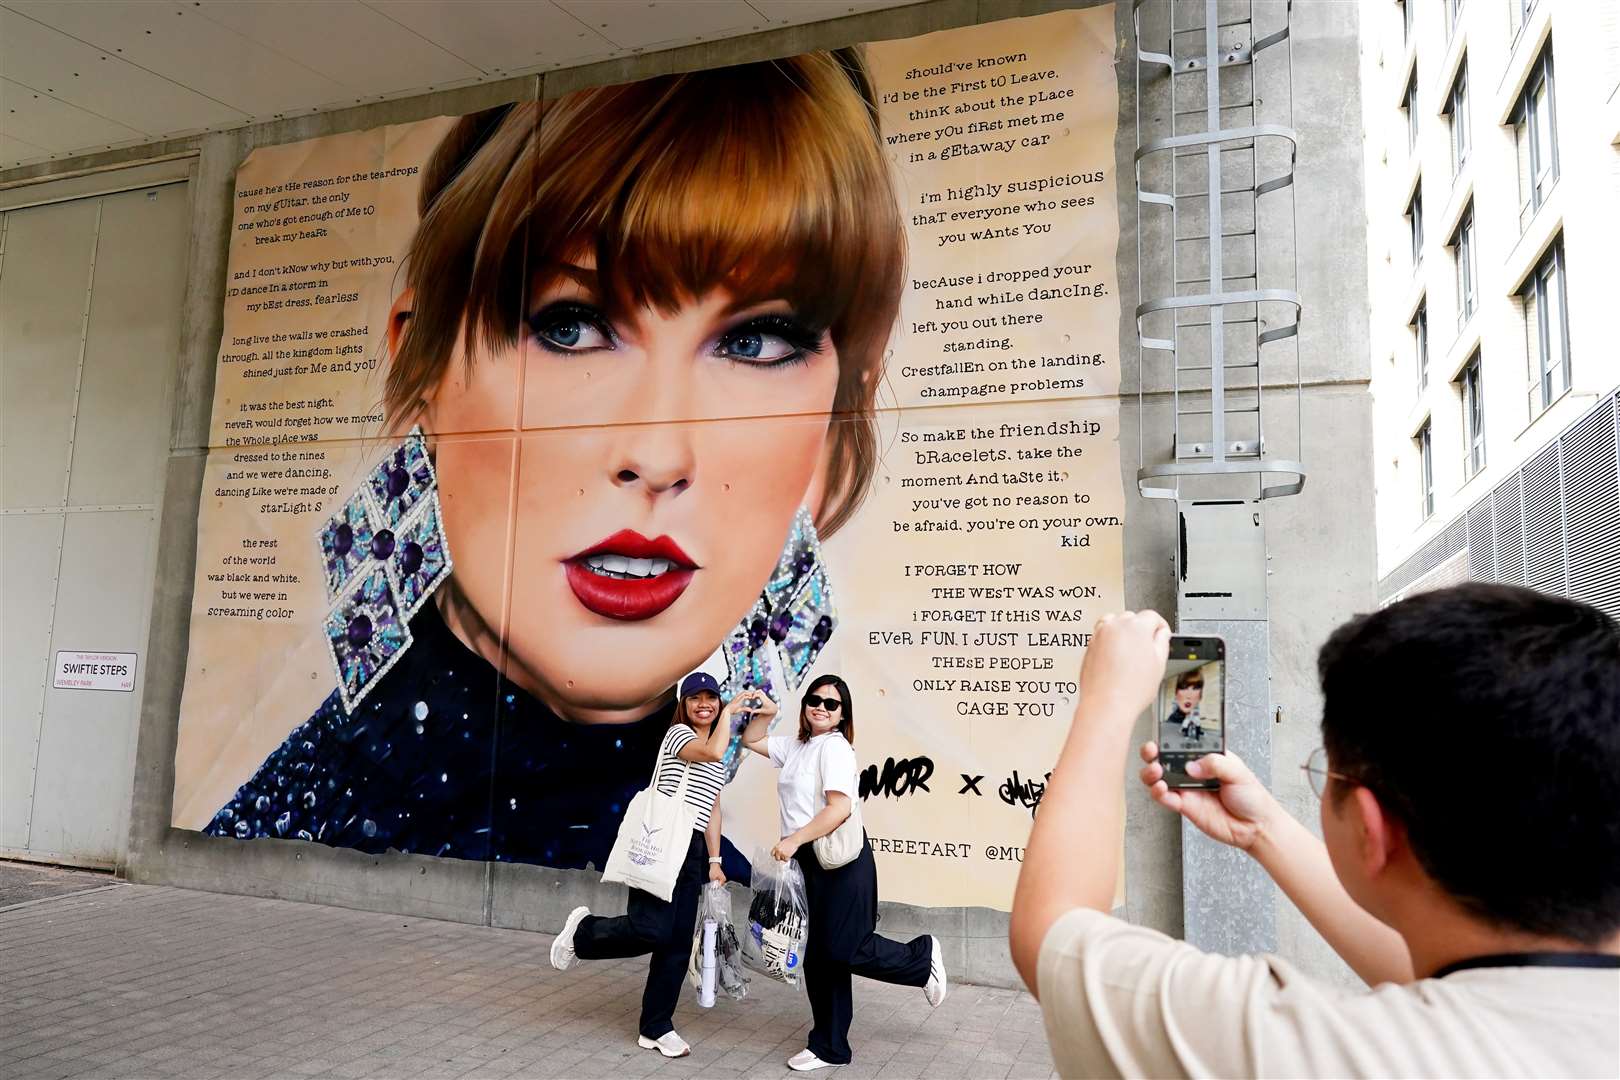 Fans pose for selfies in front of a mural of Taylor Swift outside Wembley Stadium (Aaron Chown/PA)